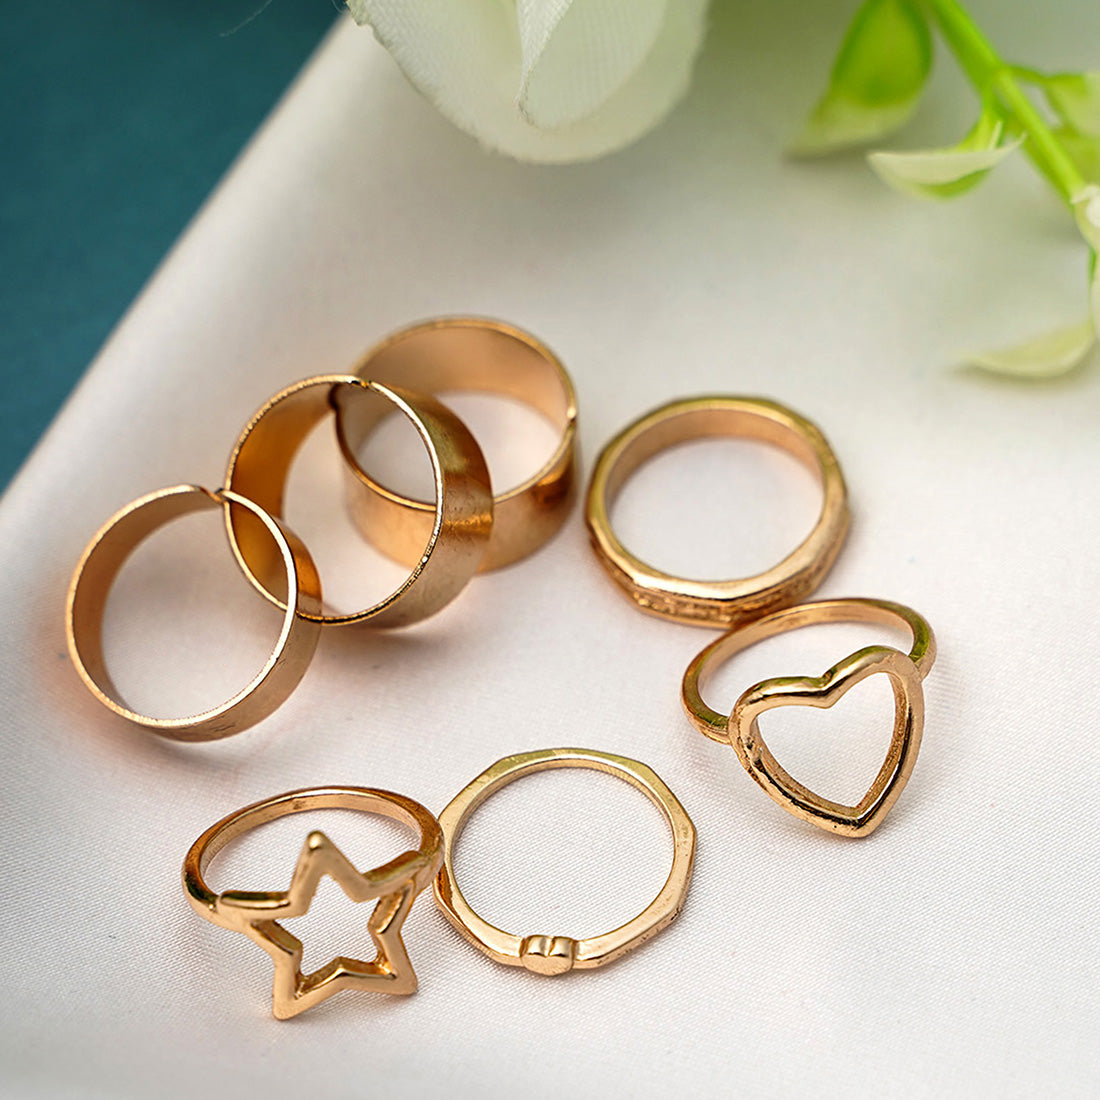 Pack Of 7 Gold-Toned Classic Ring Set